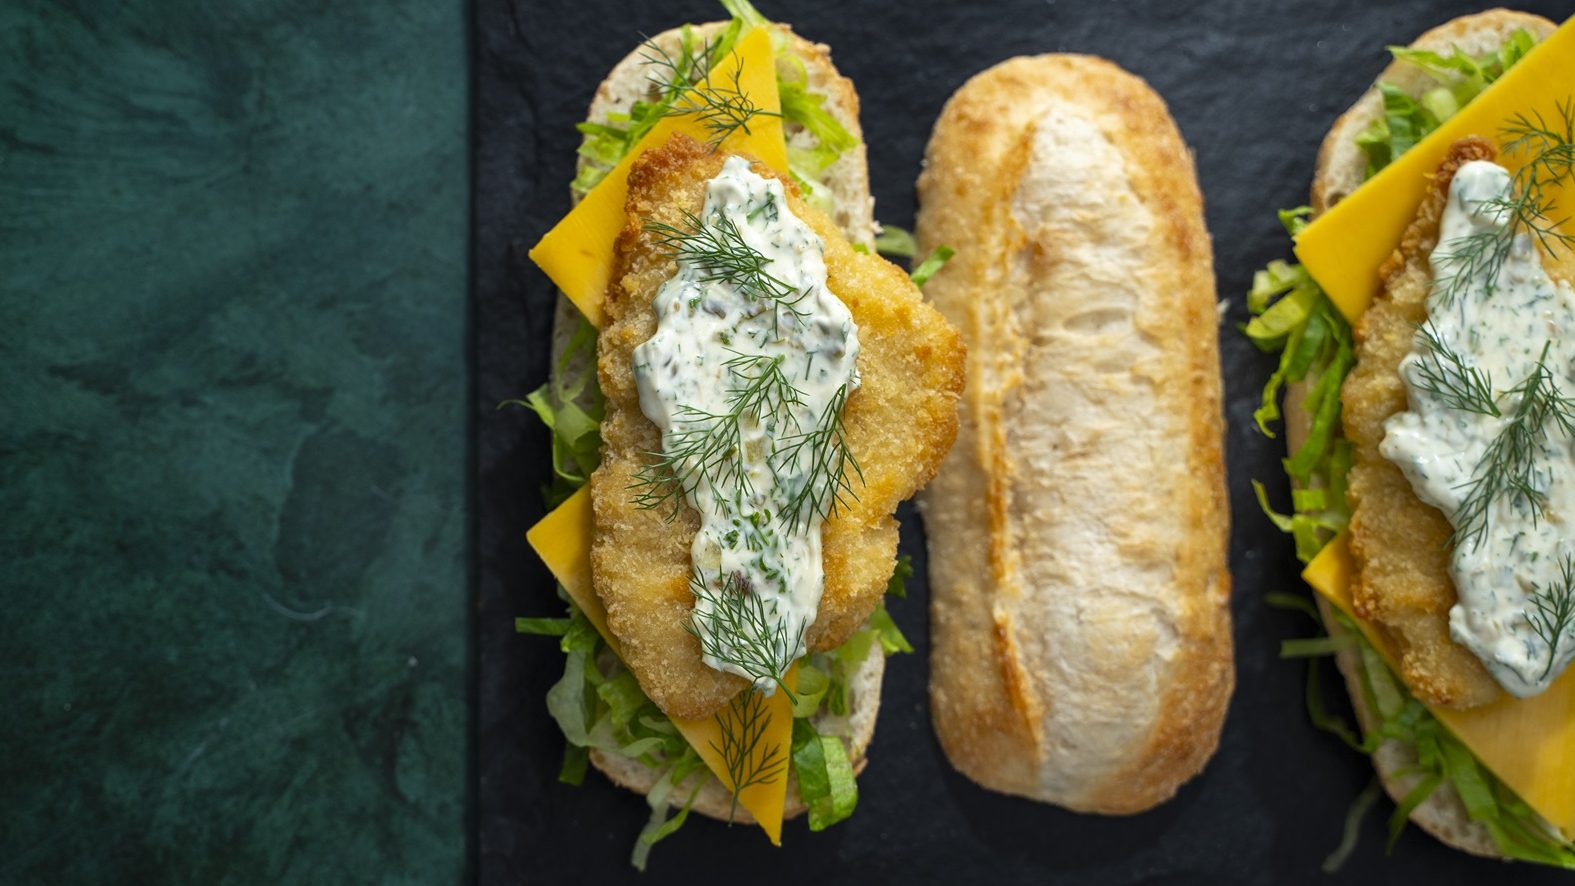 Cheese slices, lettuce, crumbed fish and tartar sauce on an oblong bread with the top half of bread on its side.